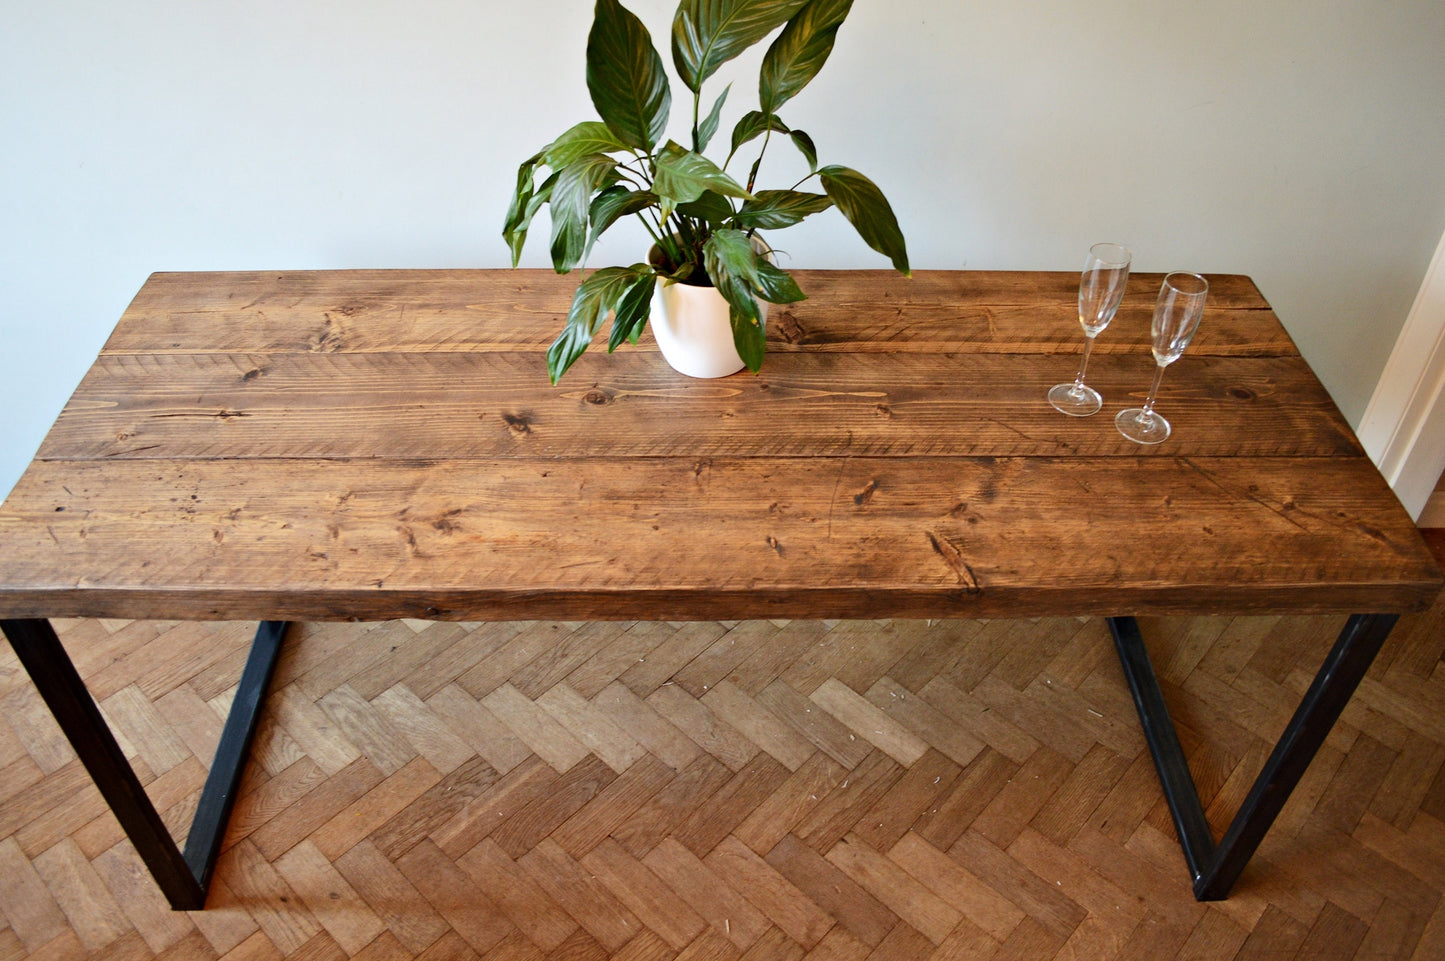 Prima Industrial Reclaimed Wood Dining Table